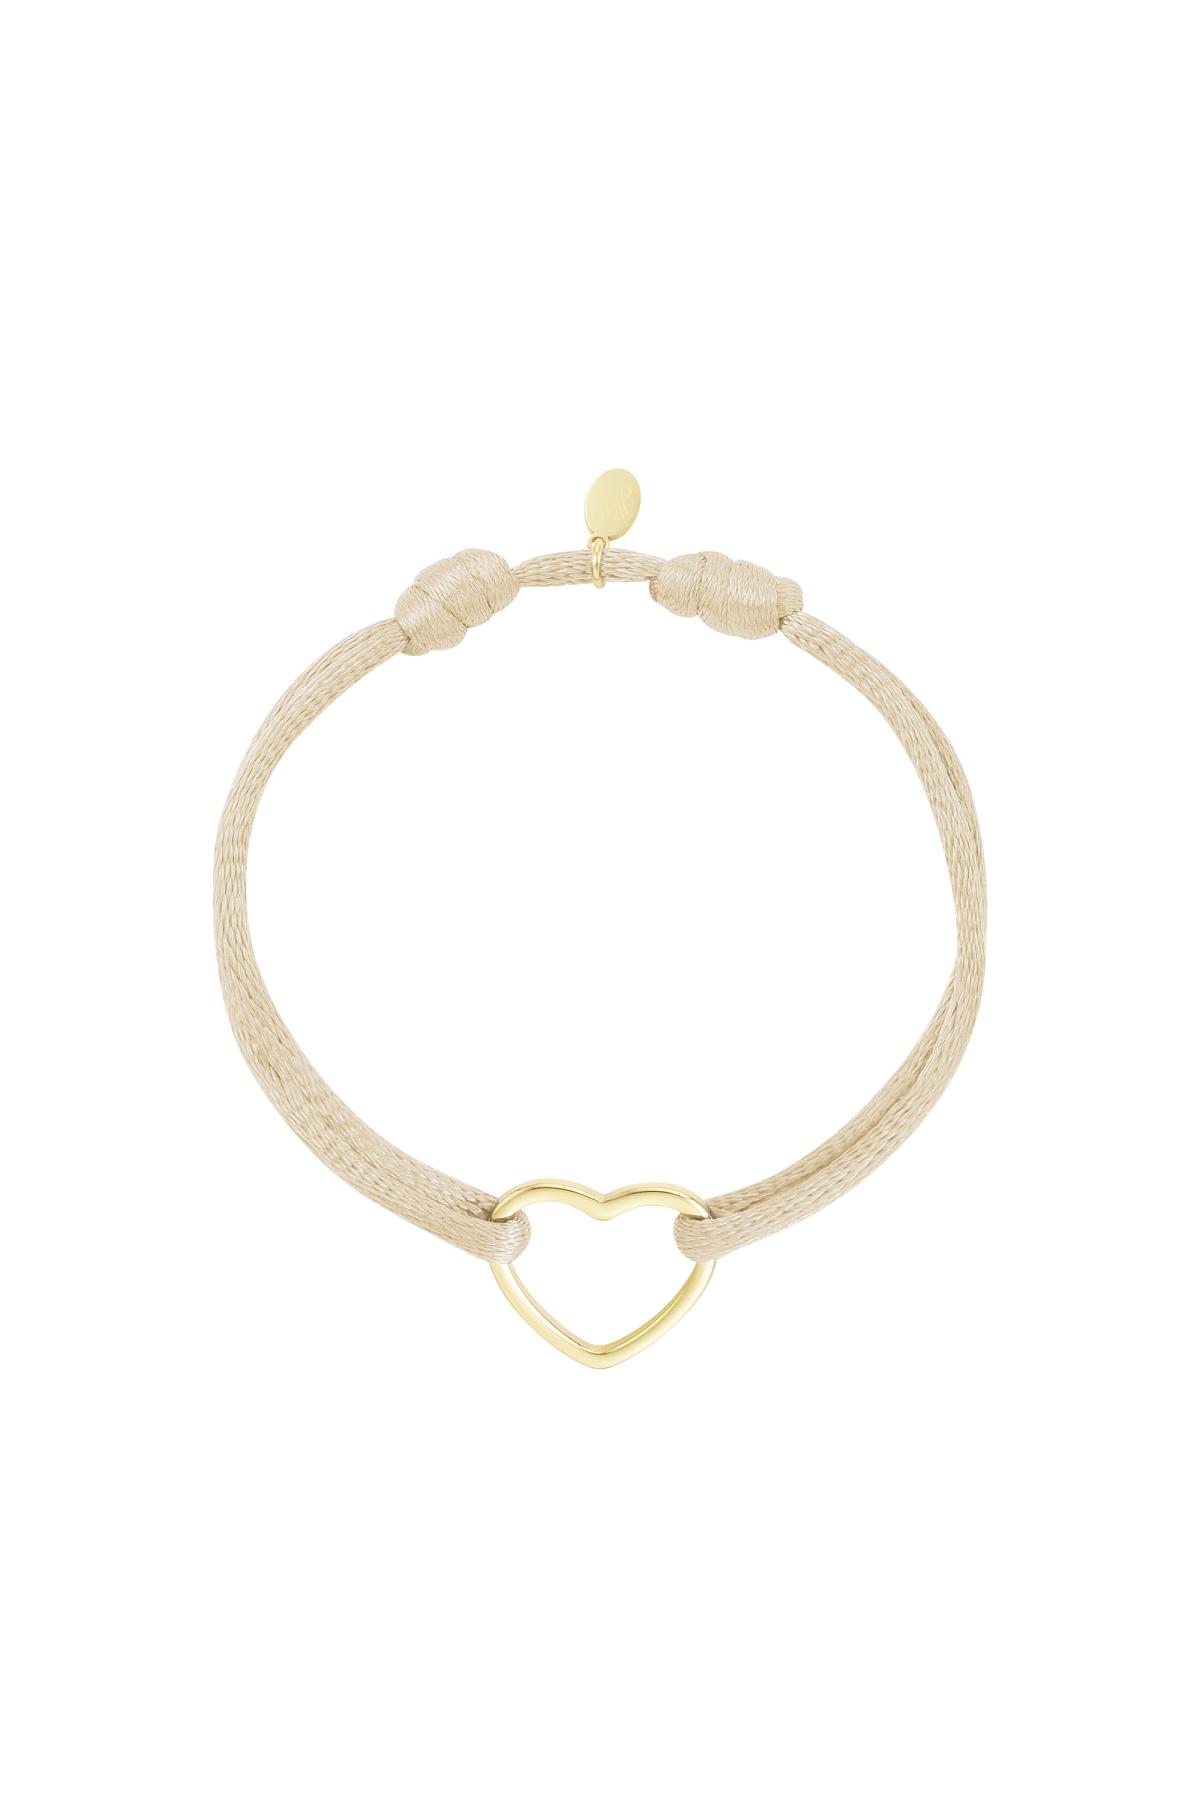 Fabric bracelet heart Champagne Stainless Steel